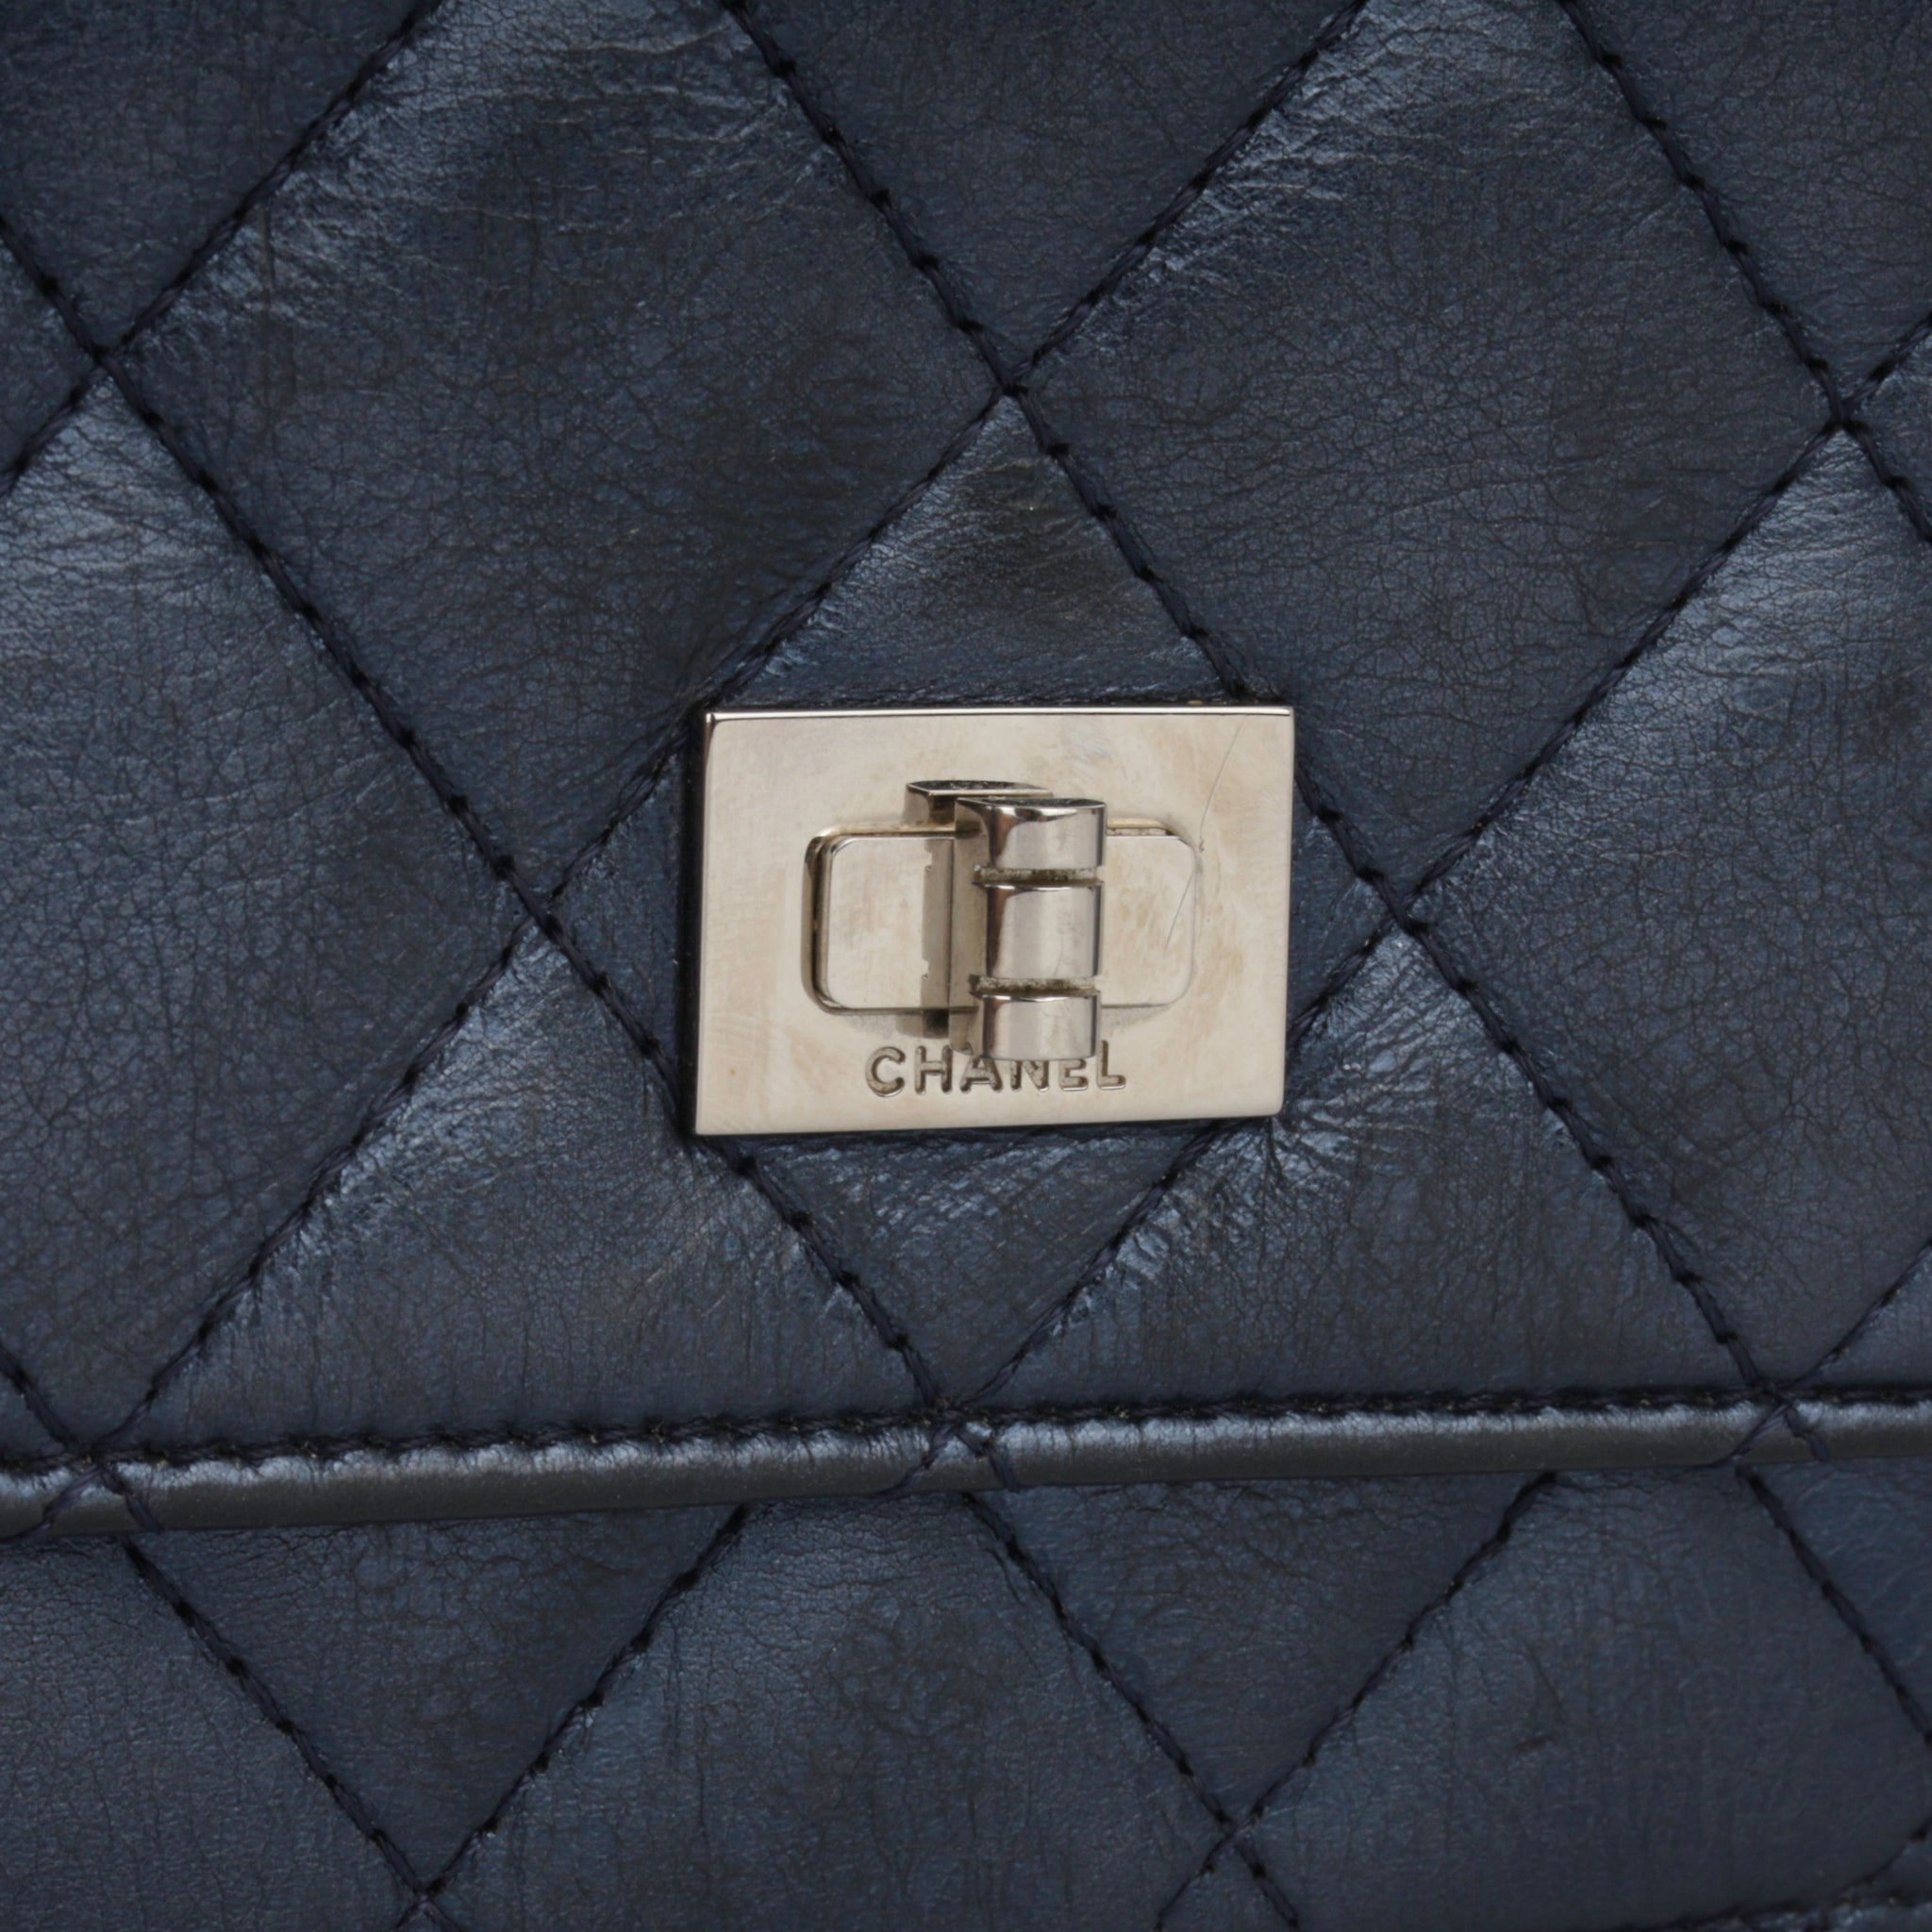 Chanel - Re-issue Wallet on Chain - Navy Metallic Calfkin Leather